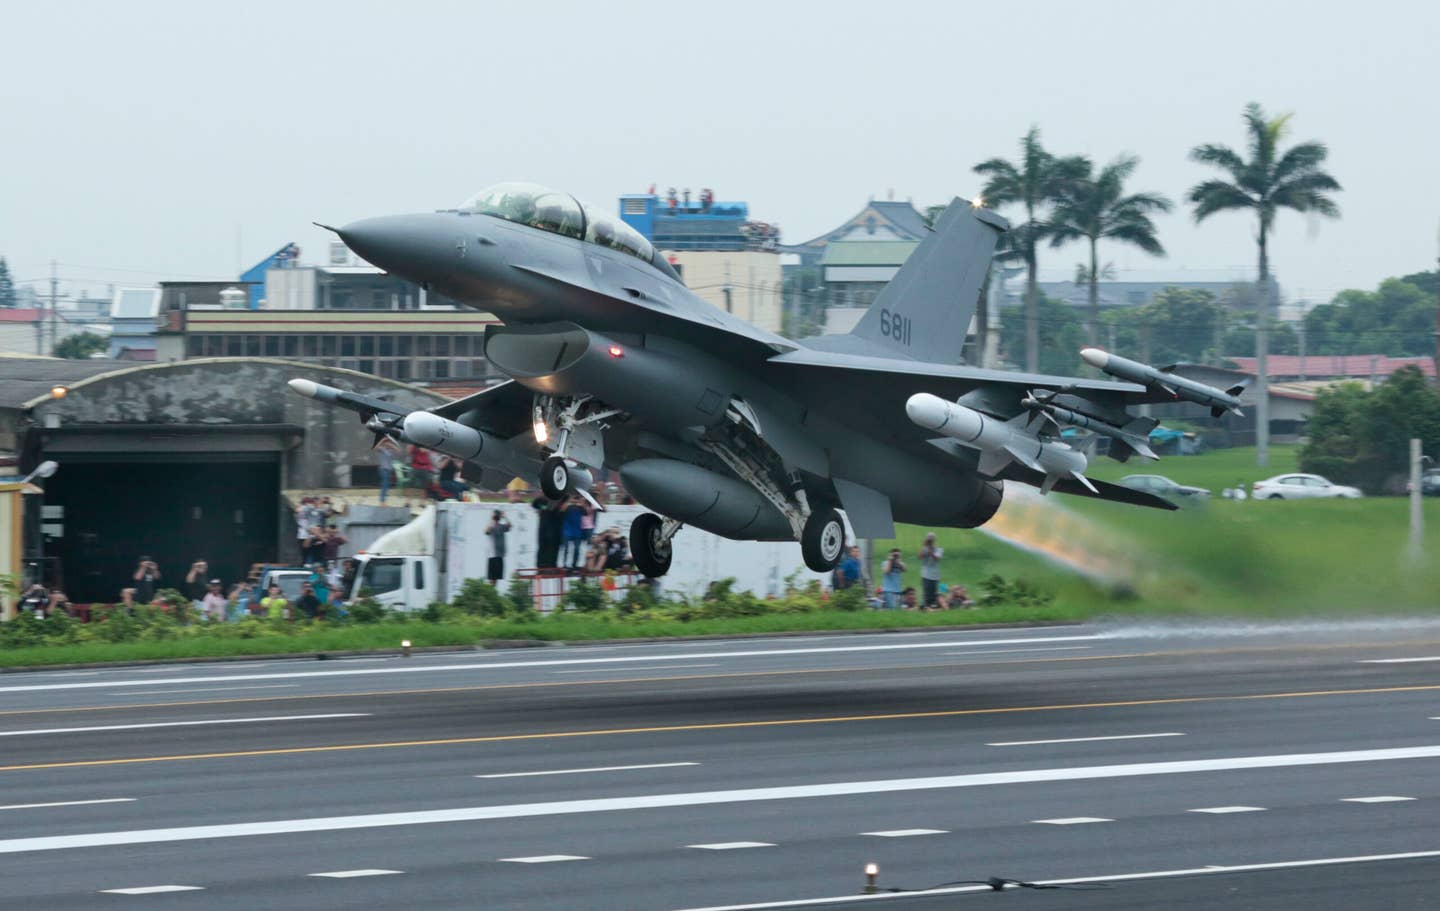 A ROC Air Force F-16 takes off armed with Harpoon anti-ship missiles during an anti-invasion drill conducted from the highway at Chang-Hua in 2019. <em>Photo by Patrick Aventurier/Getty Images</em>